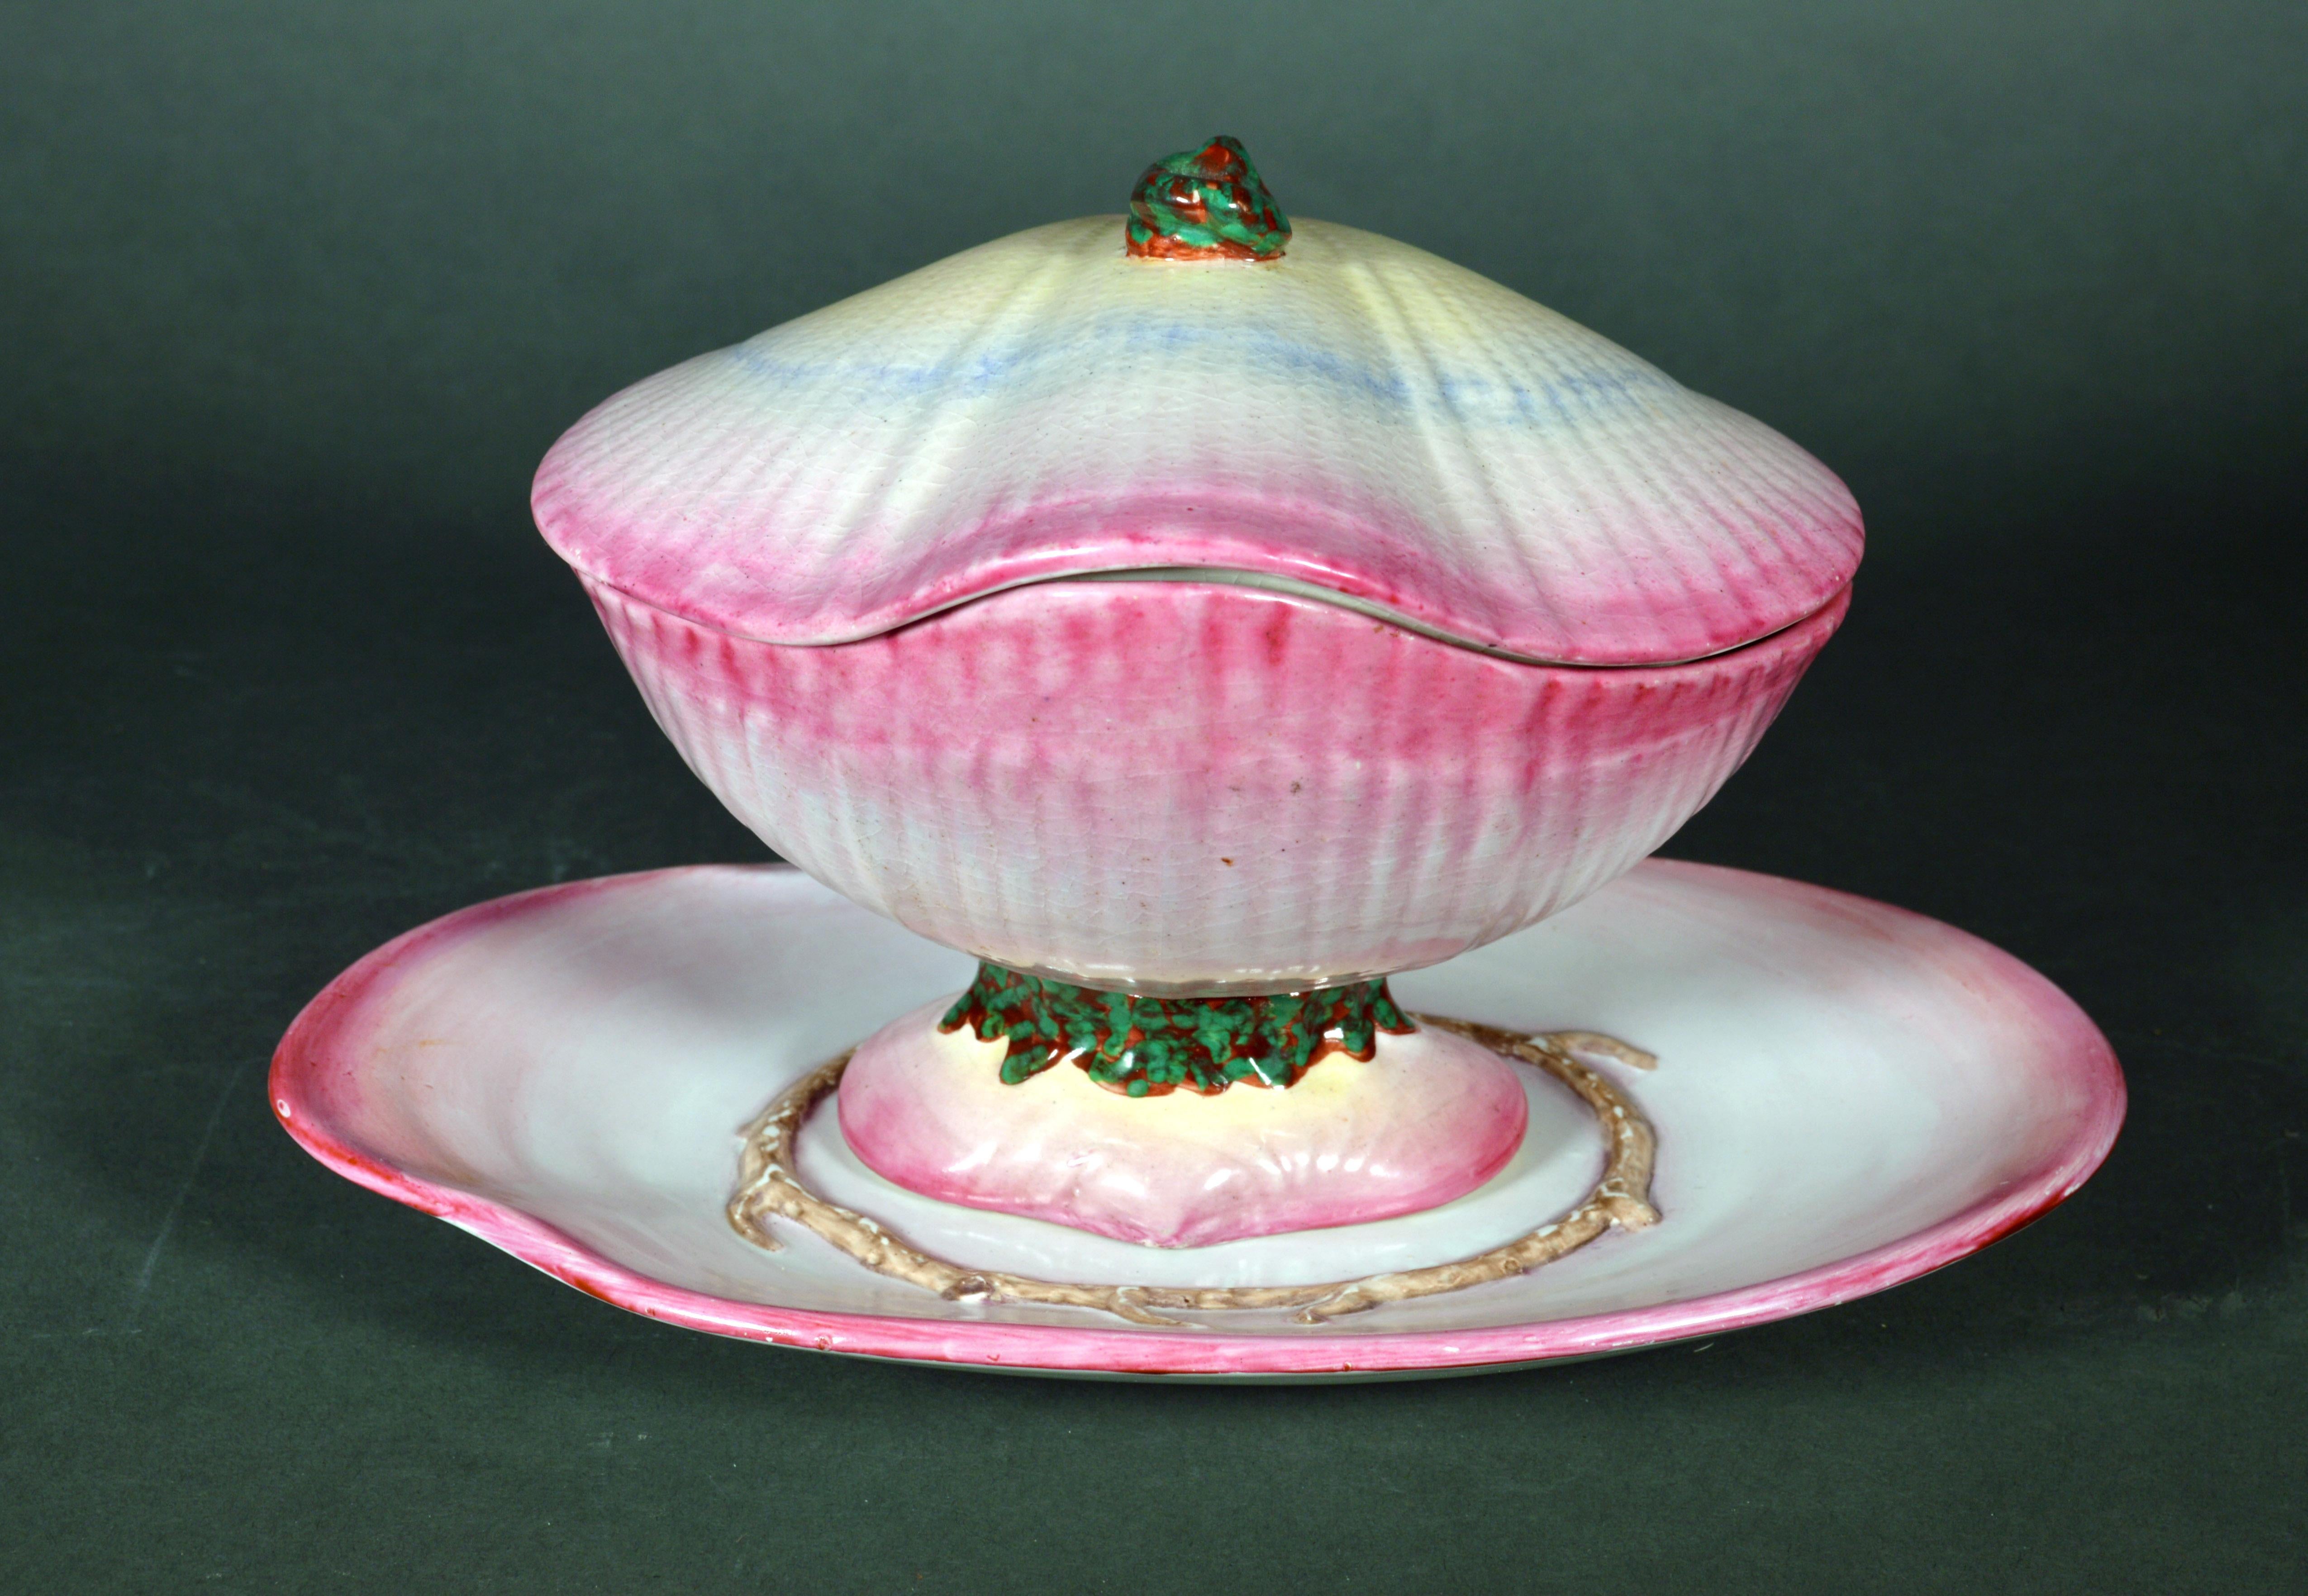 Wedgwood Nautilus pearlware sauce tureen, cover and stand in the form of a Clam Shell,
circa 1810-1820
(NY9534-nrrr)

Dimensions: 5 3/4 inches high x 9 1/4 inches wide x 6 inches deep

Marks: Impressed WEDGWOOD & TXY, an O & a P.

Reference: